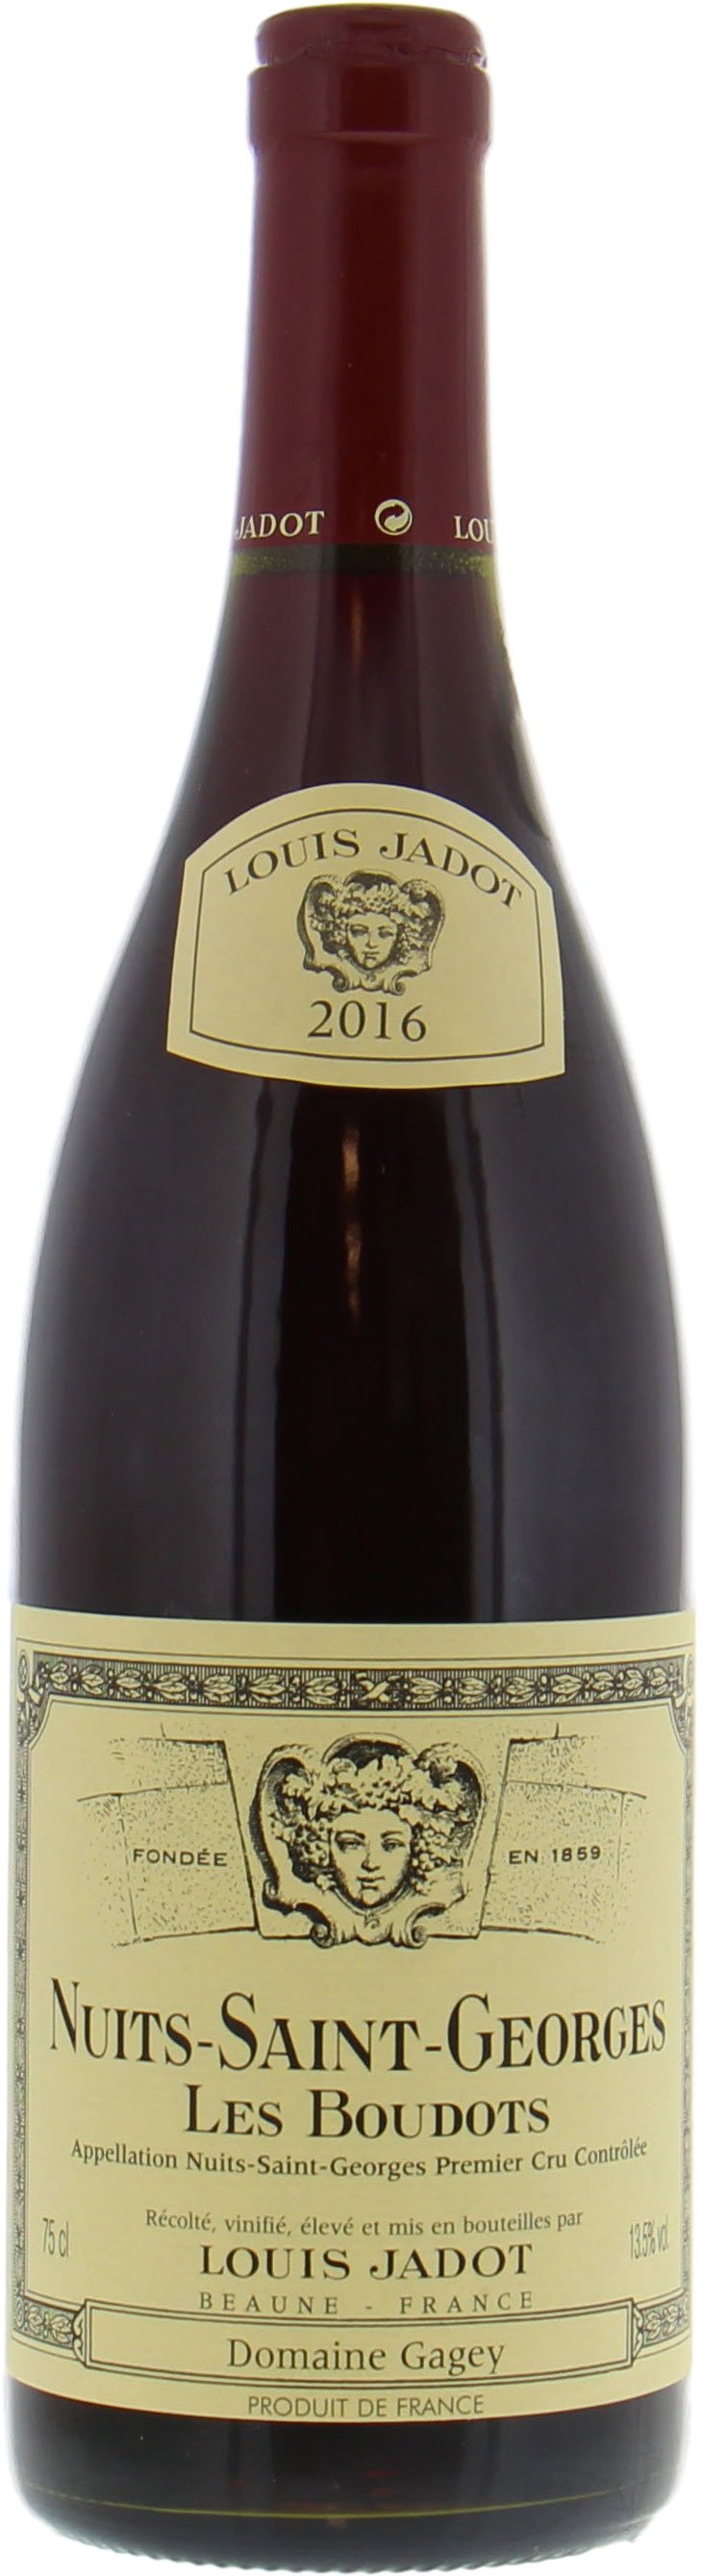 Jadot - Nuits St Georges Boudots 2016 Perfect